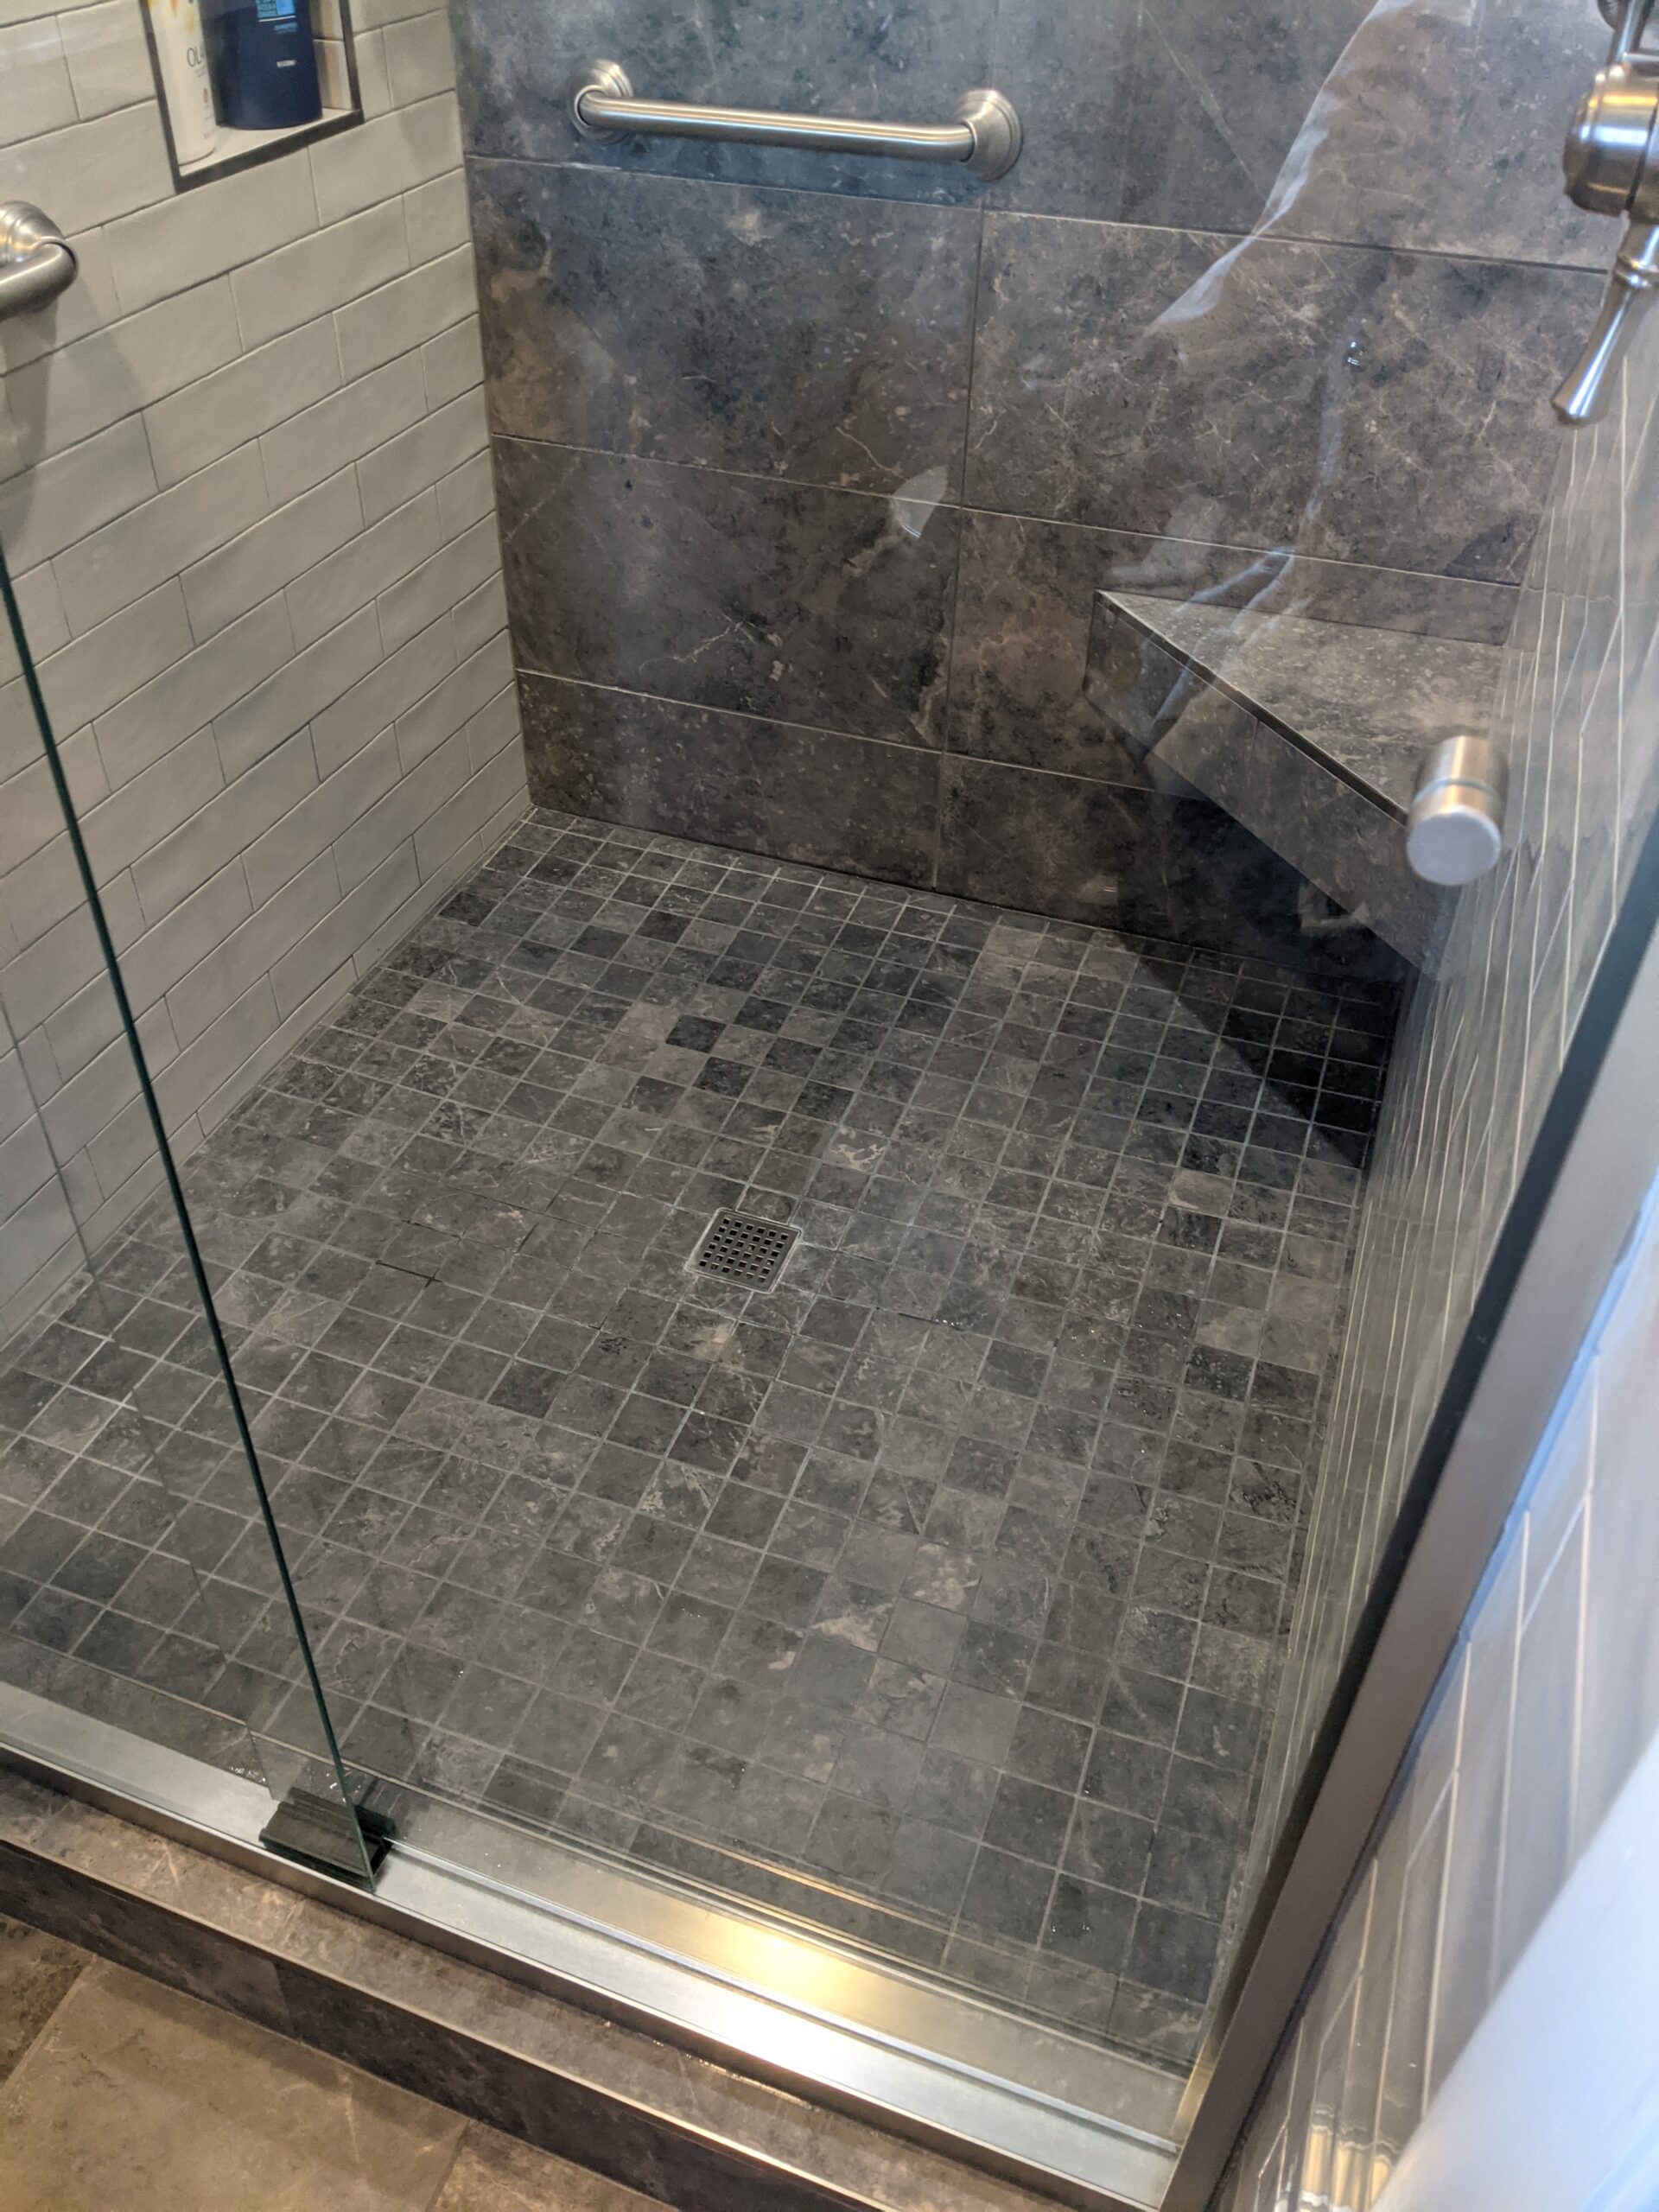 Image showing the shower floor.